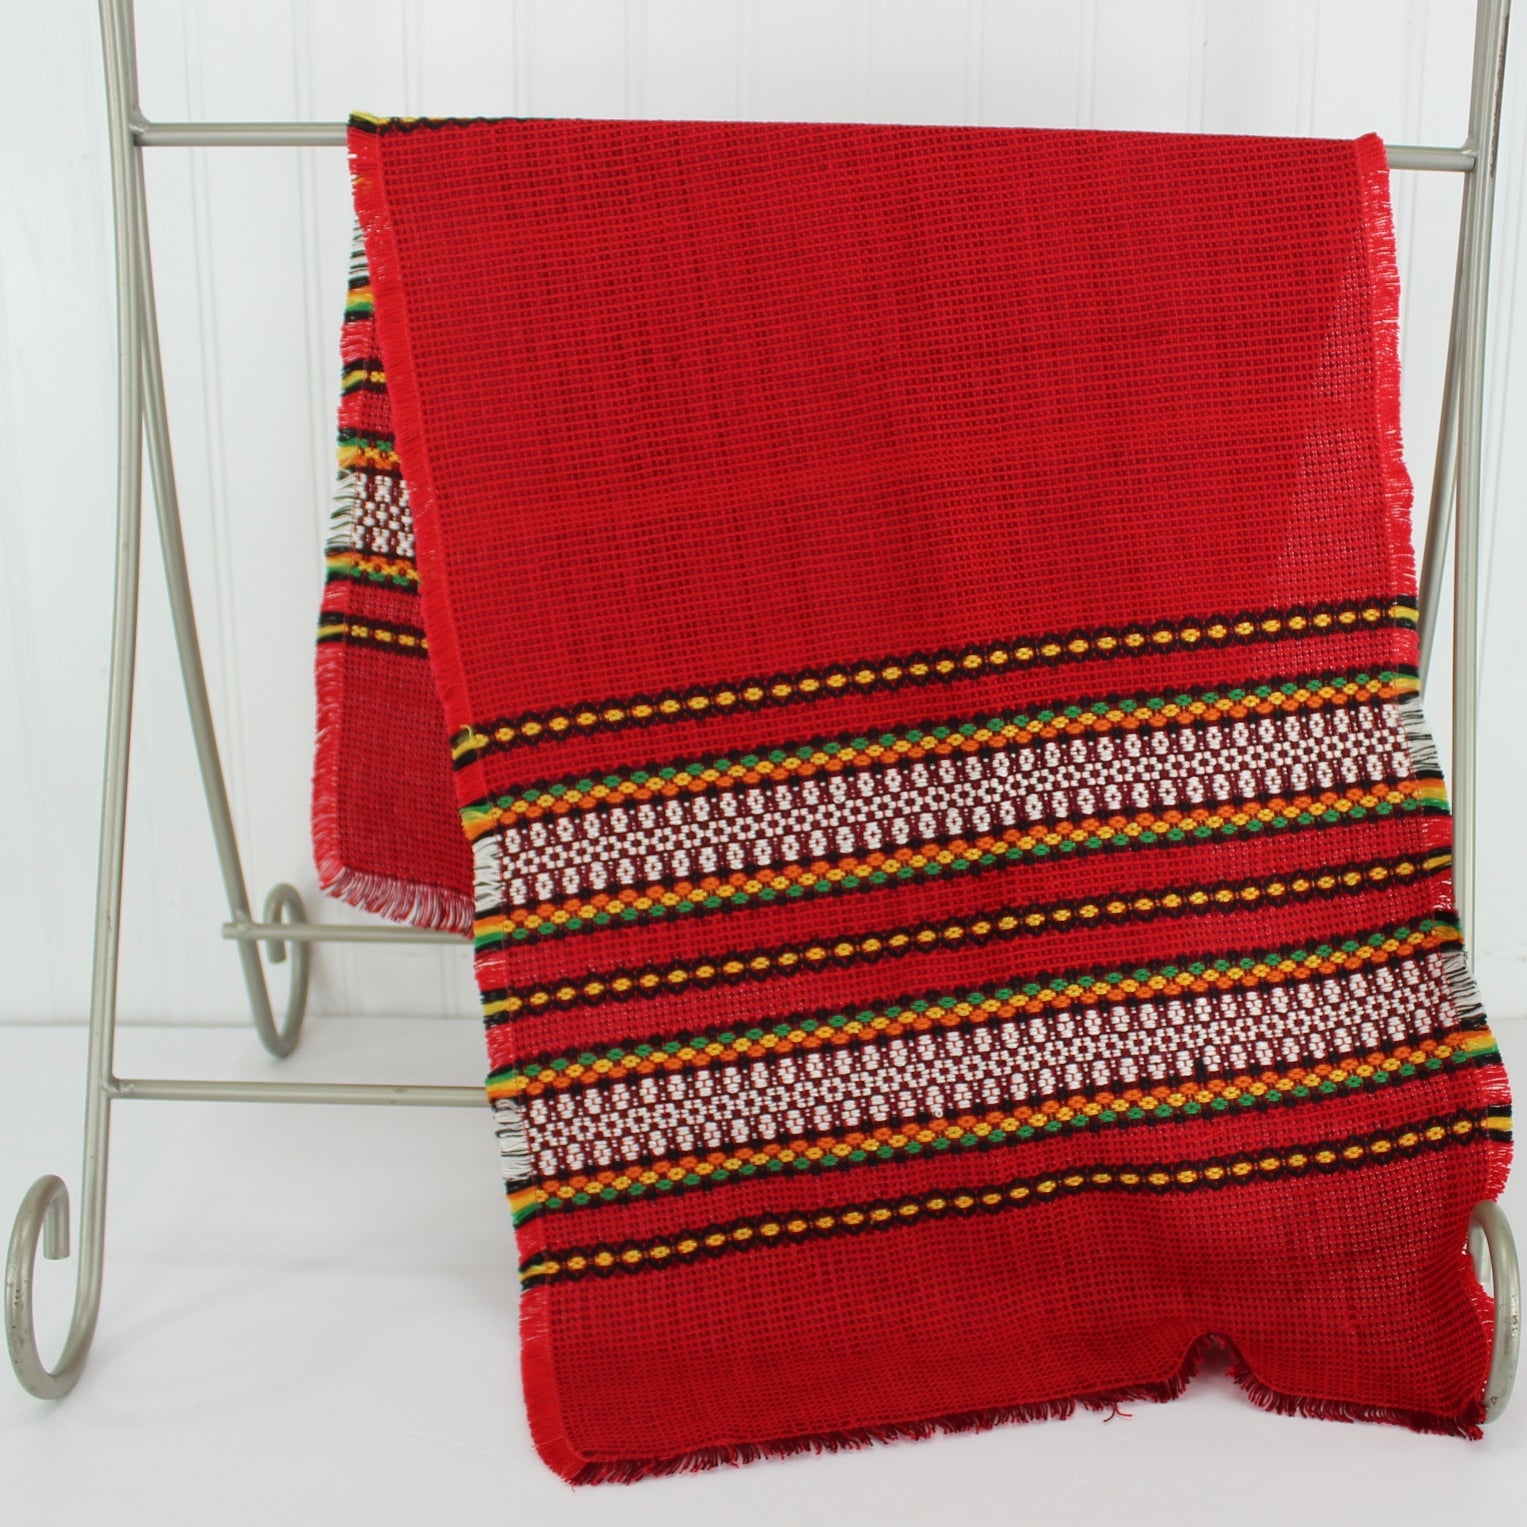 Classic 2 Pieces Ukraine Hand Made Woven Rectangular Runners Wearables Red White Black vibrant colorful items